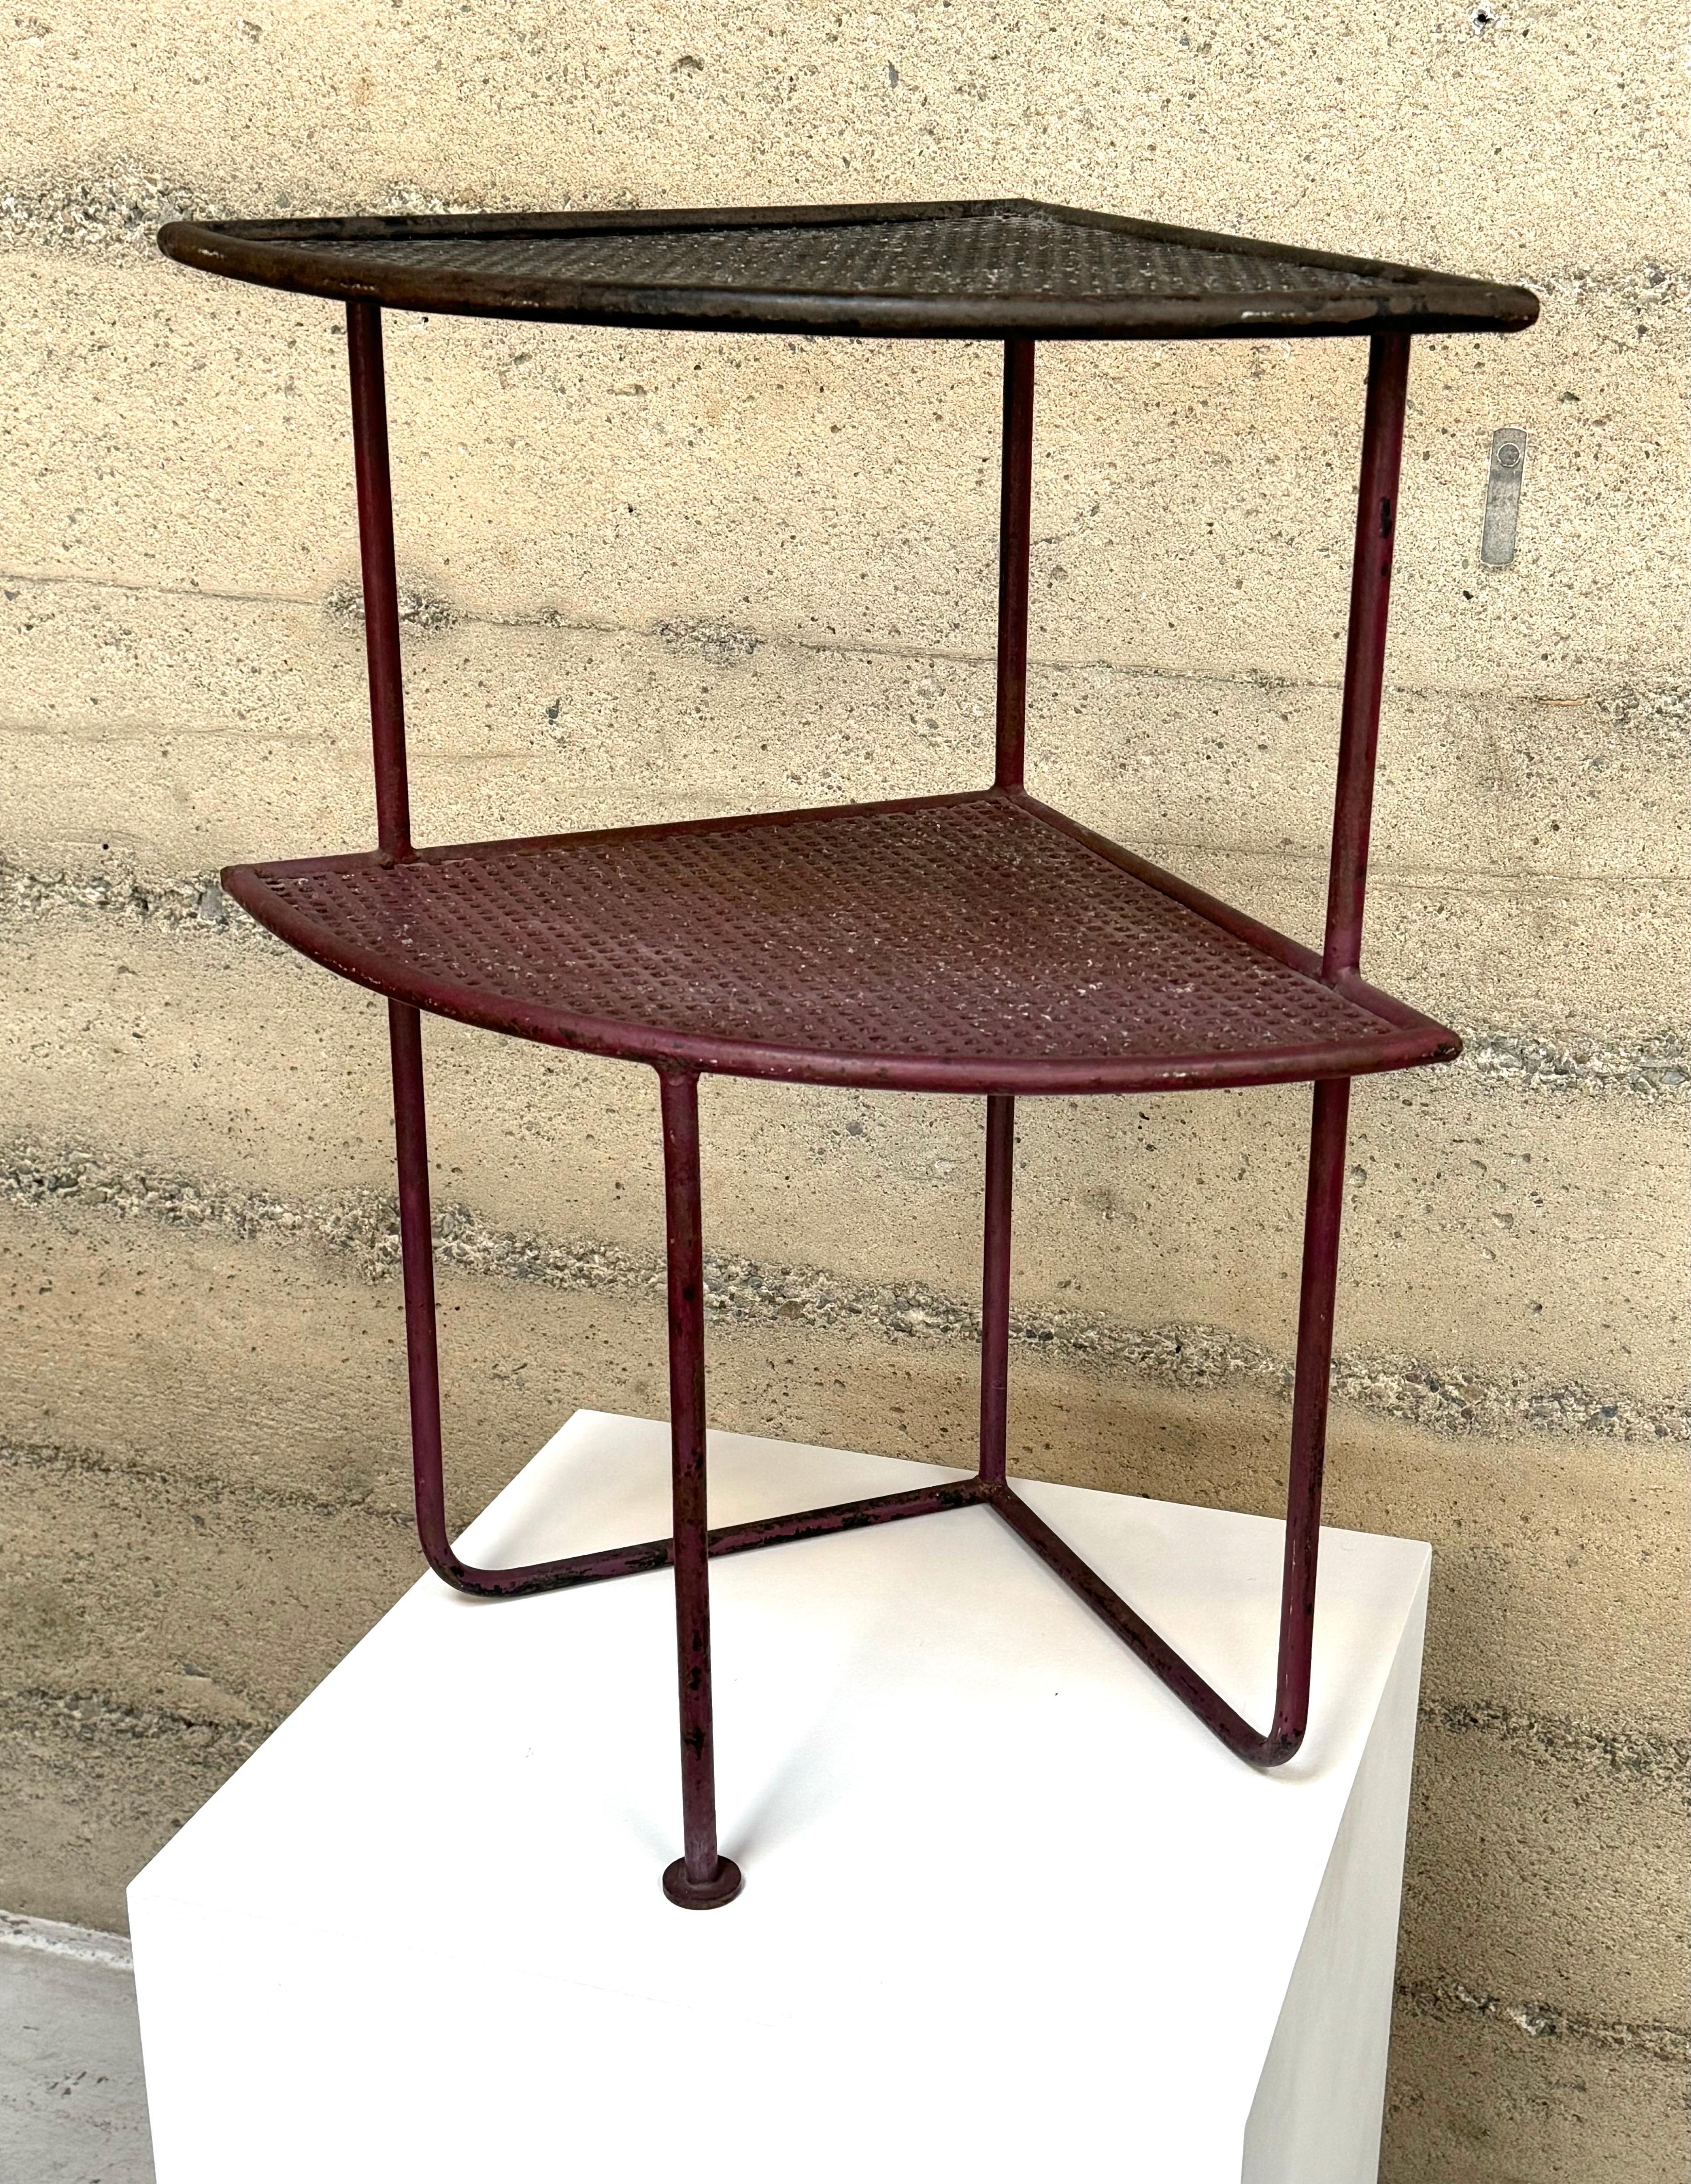 1950s Modernist French Iron with Perforated Metal Shelves Side Table For Sale 2